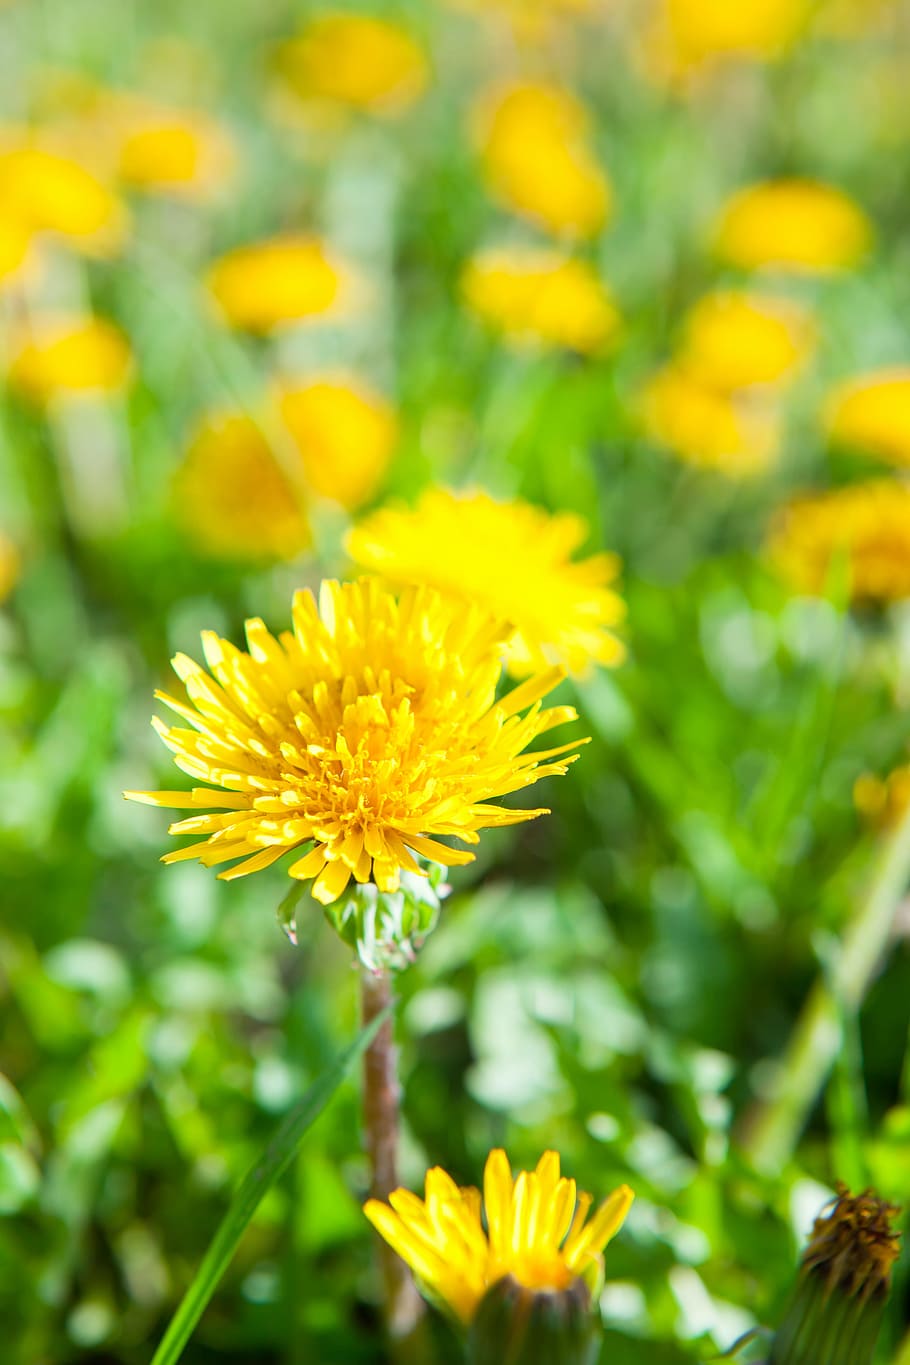 dandelion, background, blossom, bright, colorful, environment, field, flower, grass, green